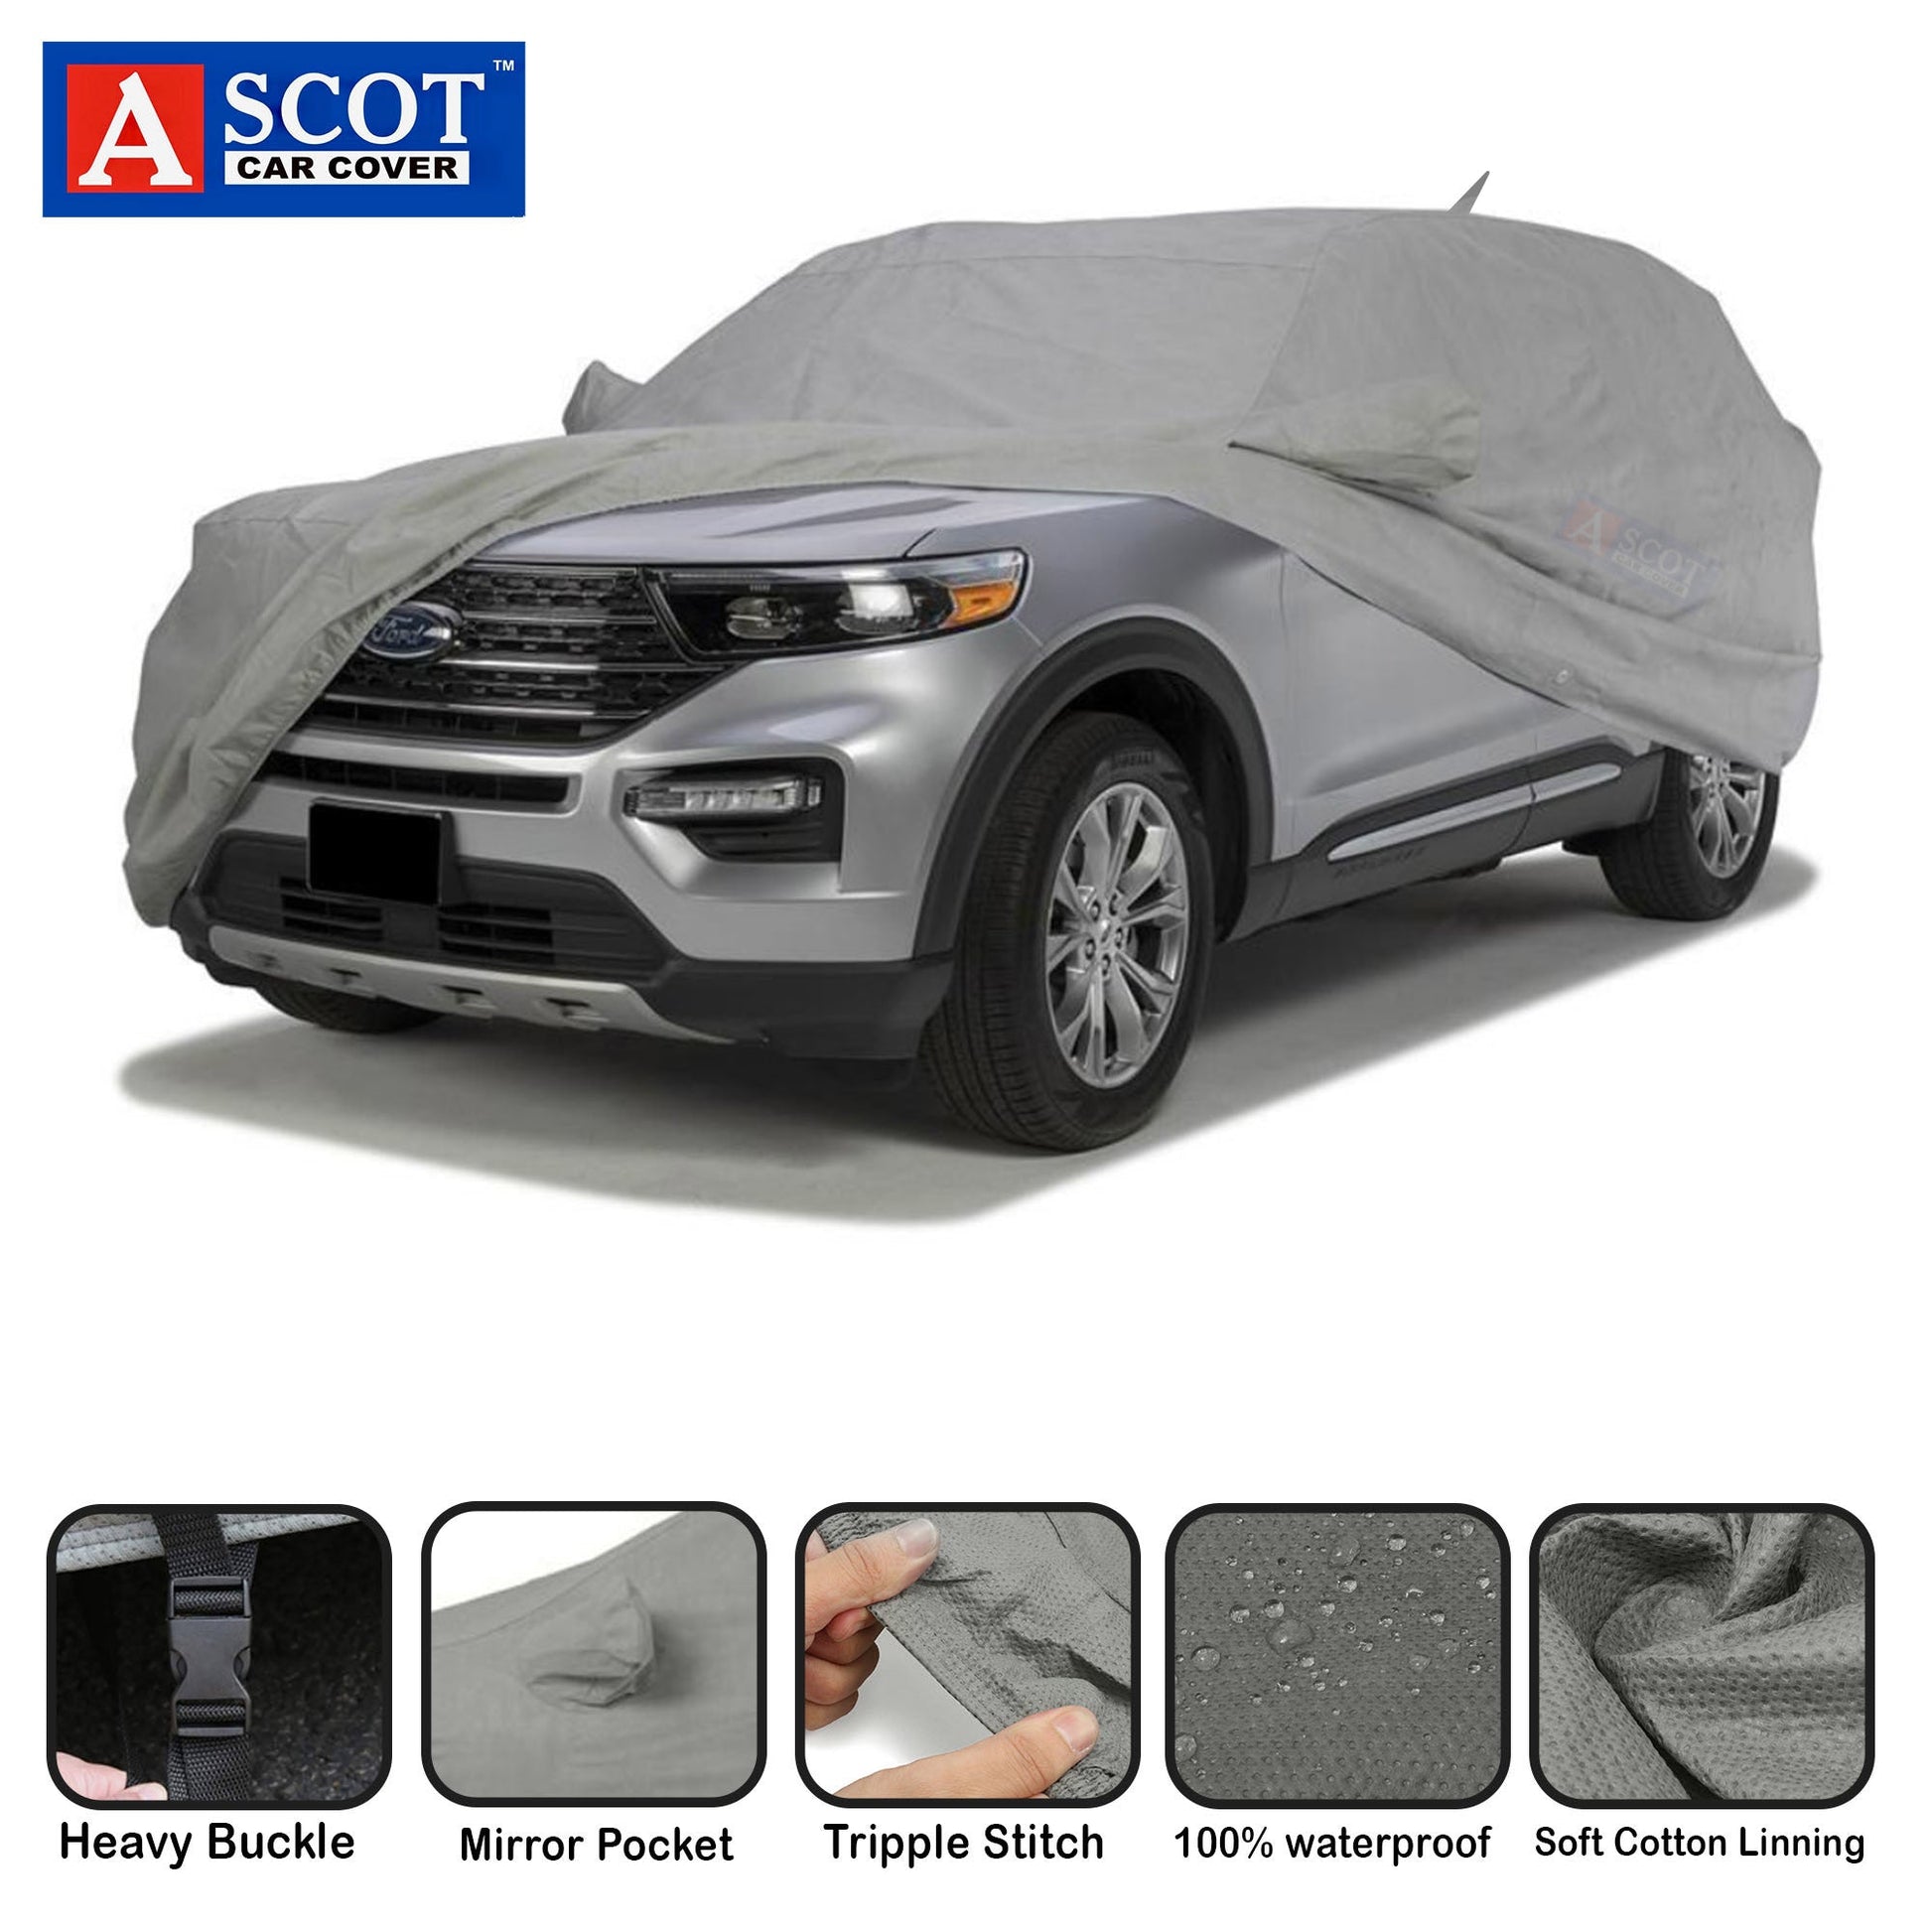 Water Proof Car Cover For Maruti Suzuki Swift (With Mirror Pockets) Price  in India - Buy Water Proof Car Cover For Maruti Suzuki Swift (With Mirror  Pockets) online at